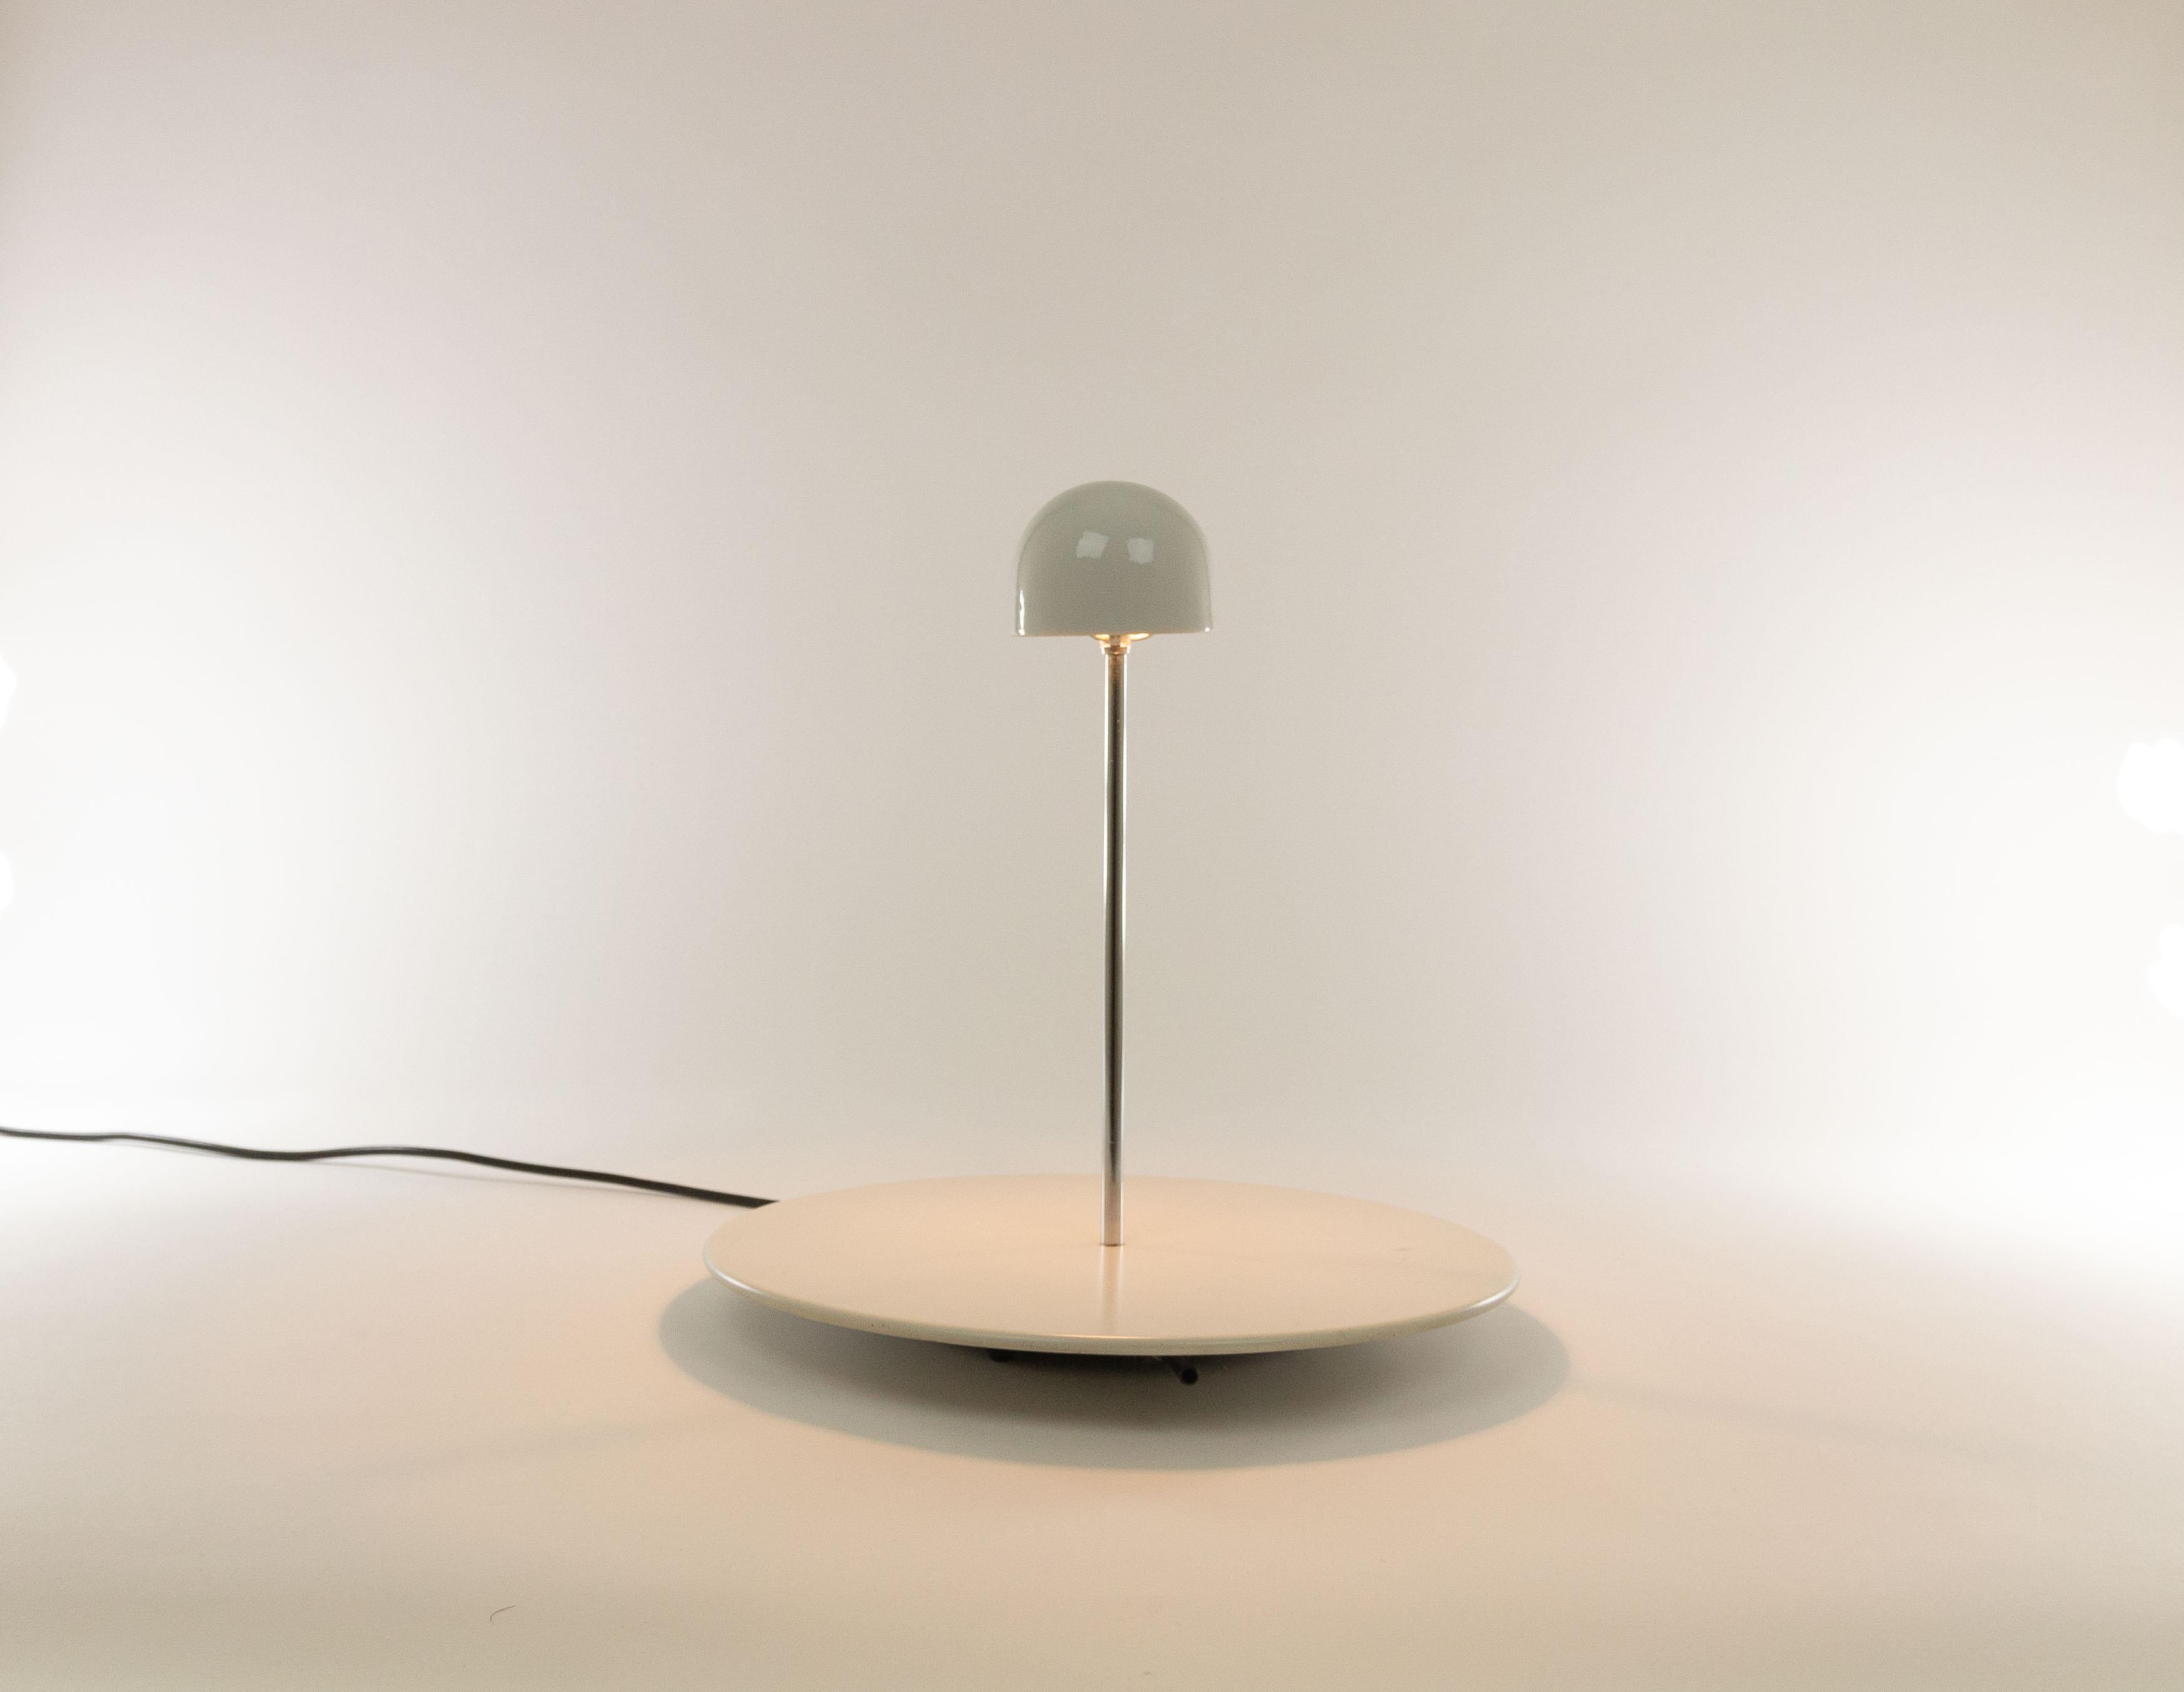 Nemea table lamp by Vico Magistretti and produced by Artemide.

Magistretti designed Nemea in 1979. It consists of a round base, with a chrome tube and a hemisphere mounted on it. The halogen lamp is incorporated in this hemisphere; the light